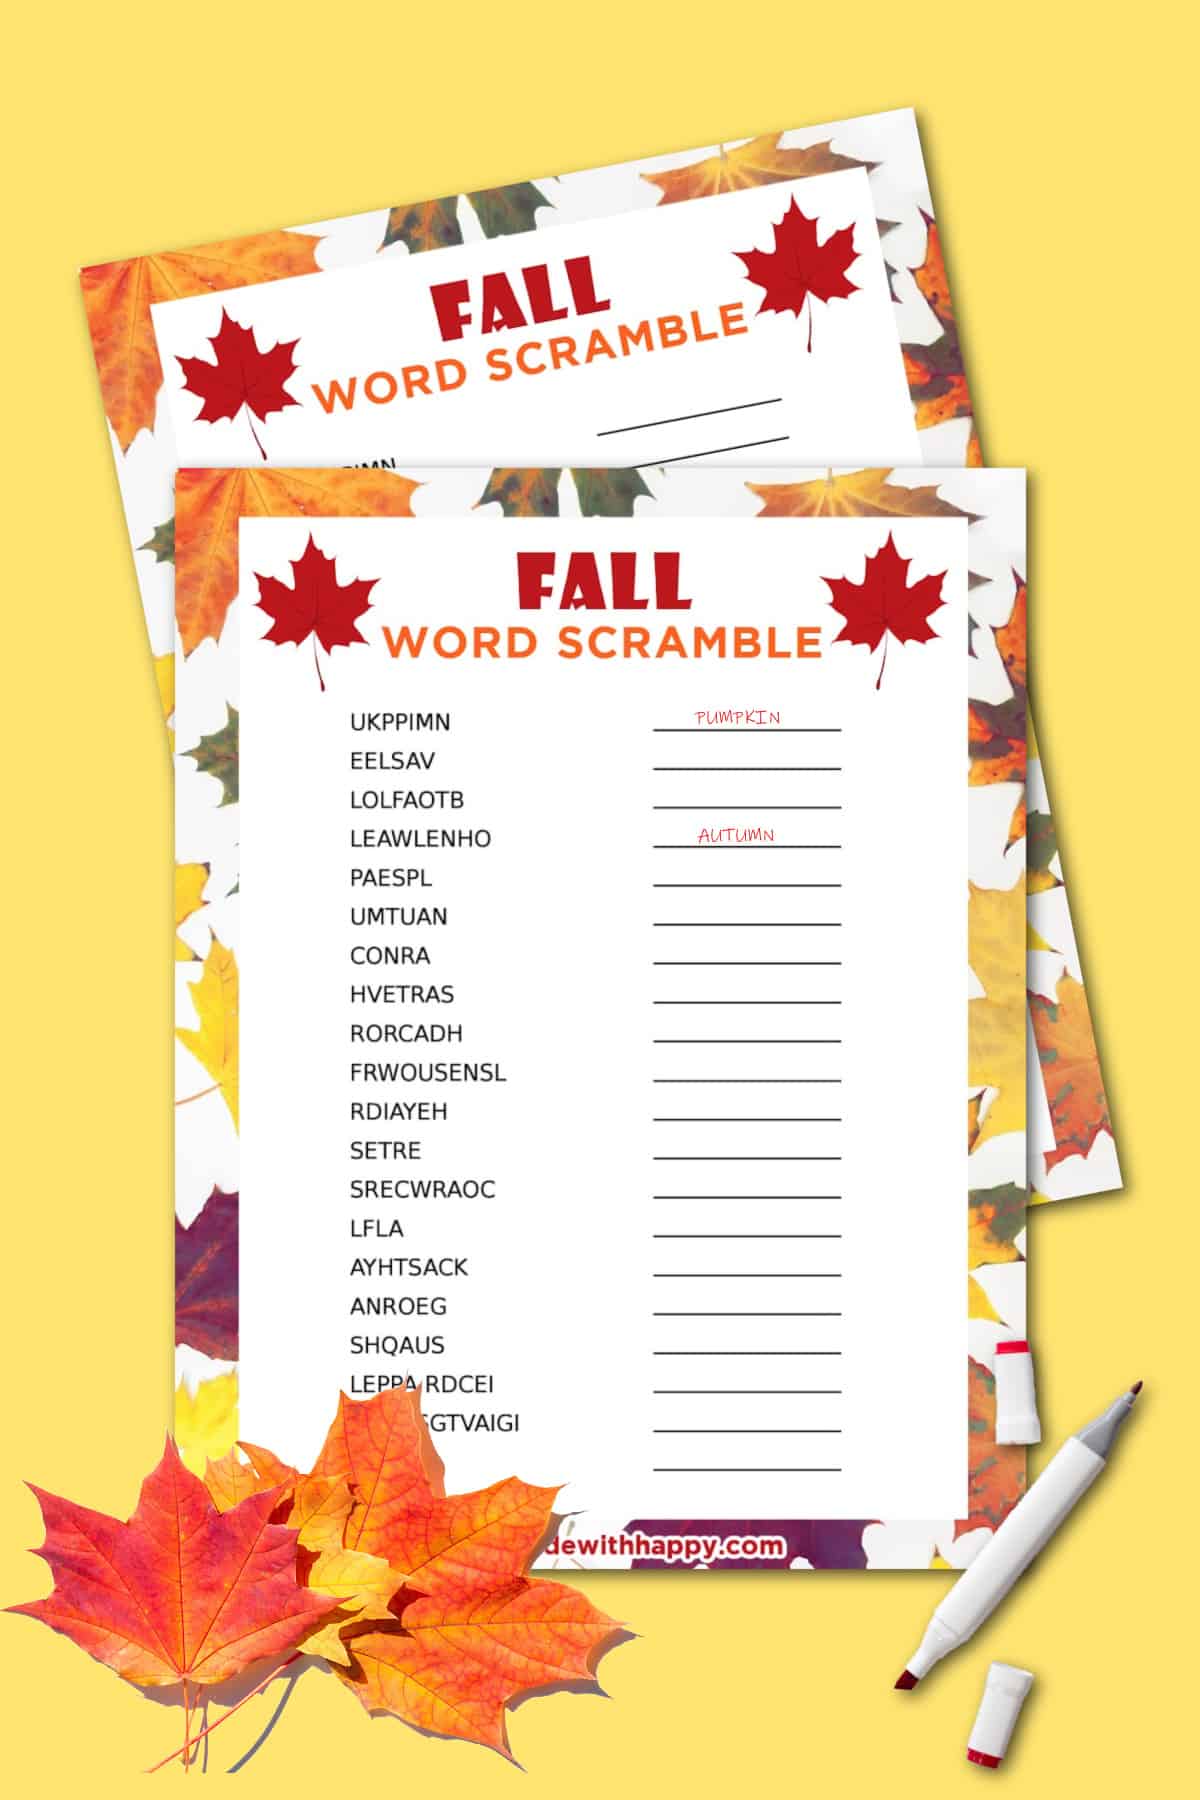 Fall Word Scramble with Answers